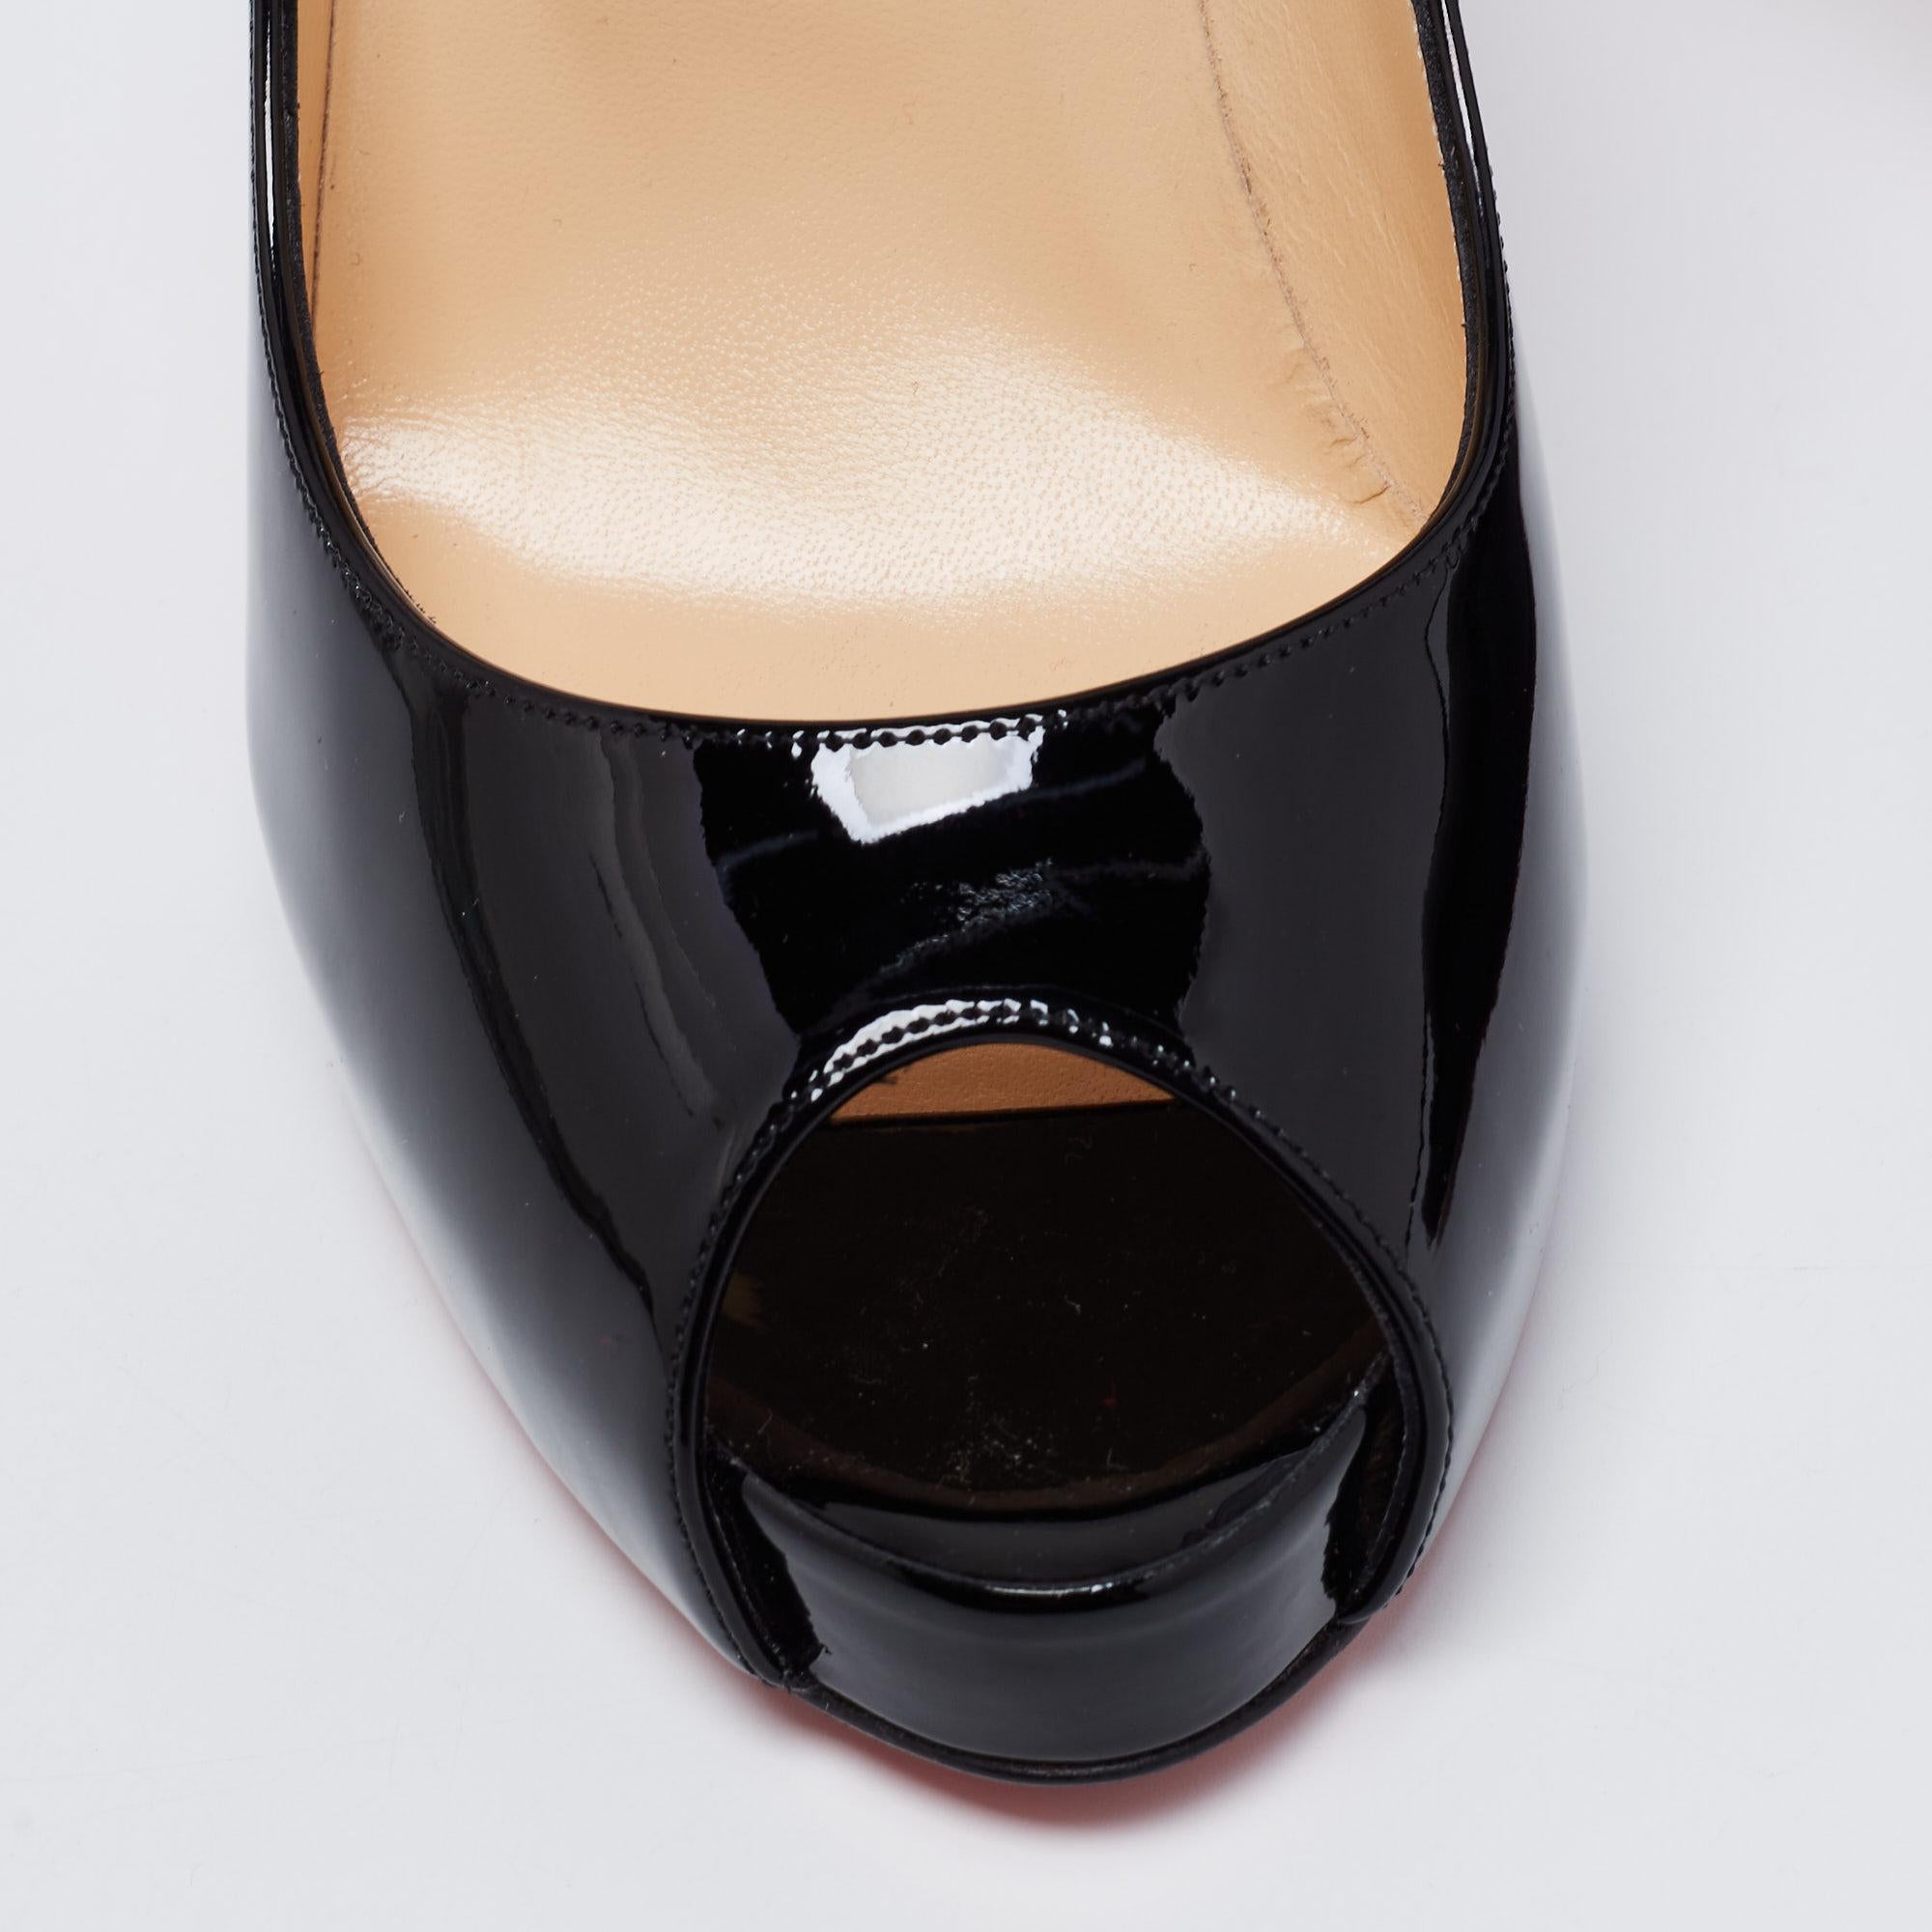 Christian Louboutin Black Patent Leather Very Prive Peep-Toe Pumps Size 38.5 For Sale 2